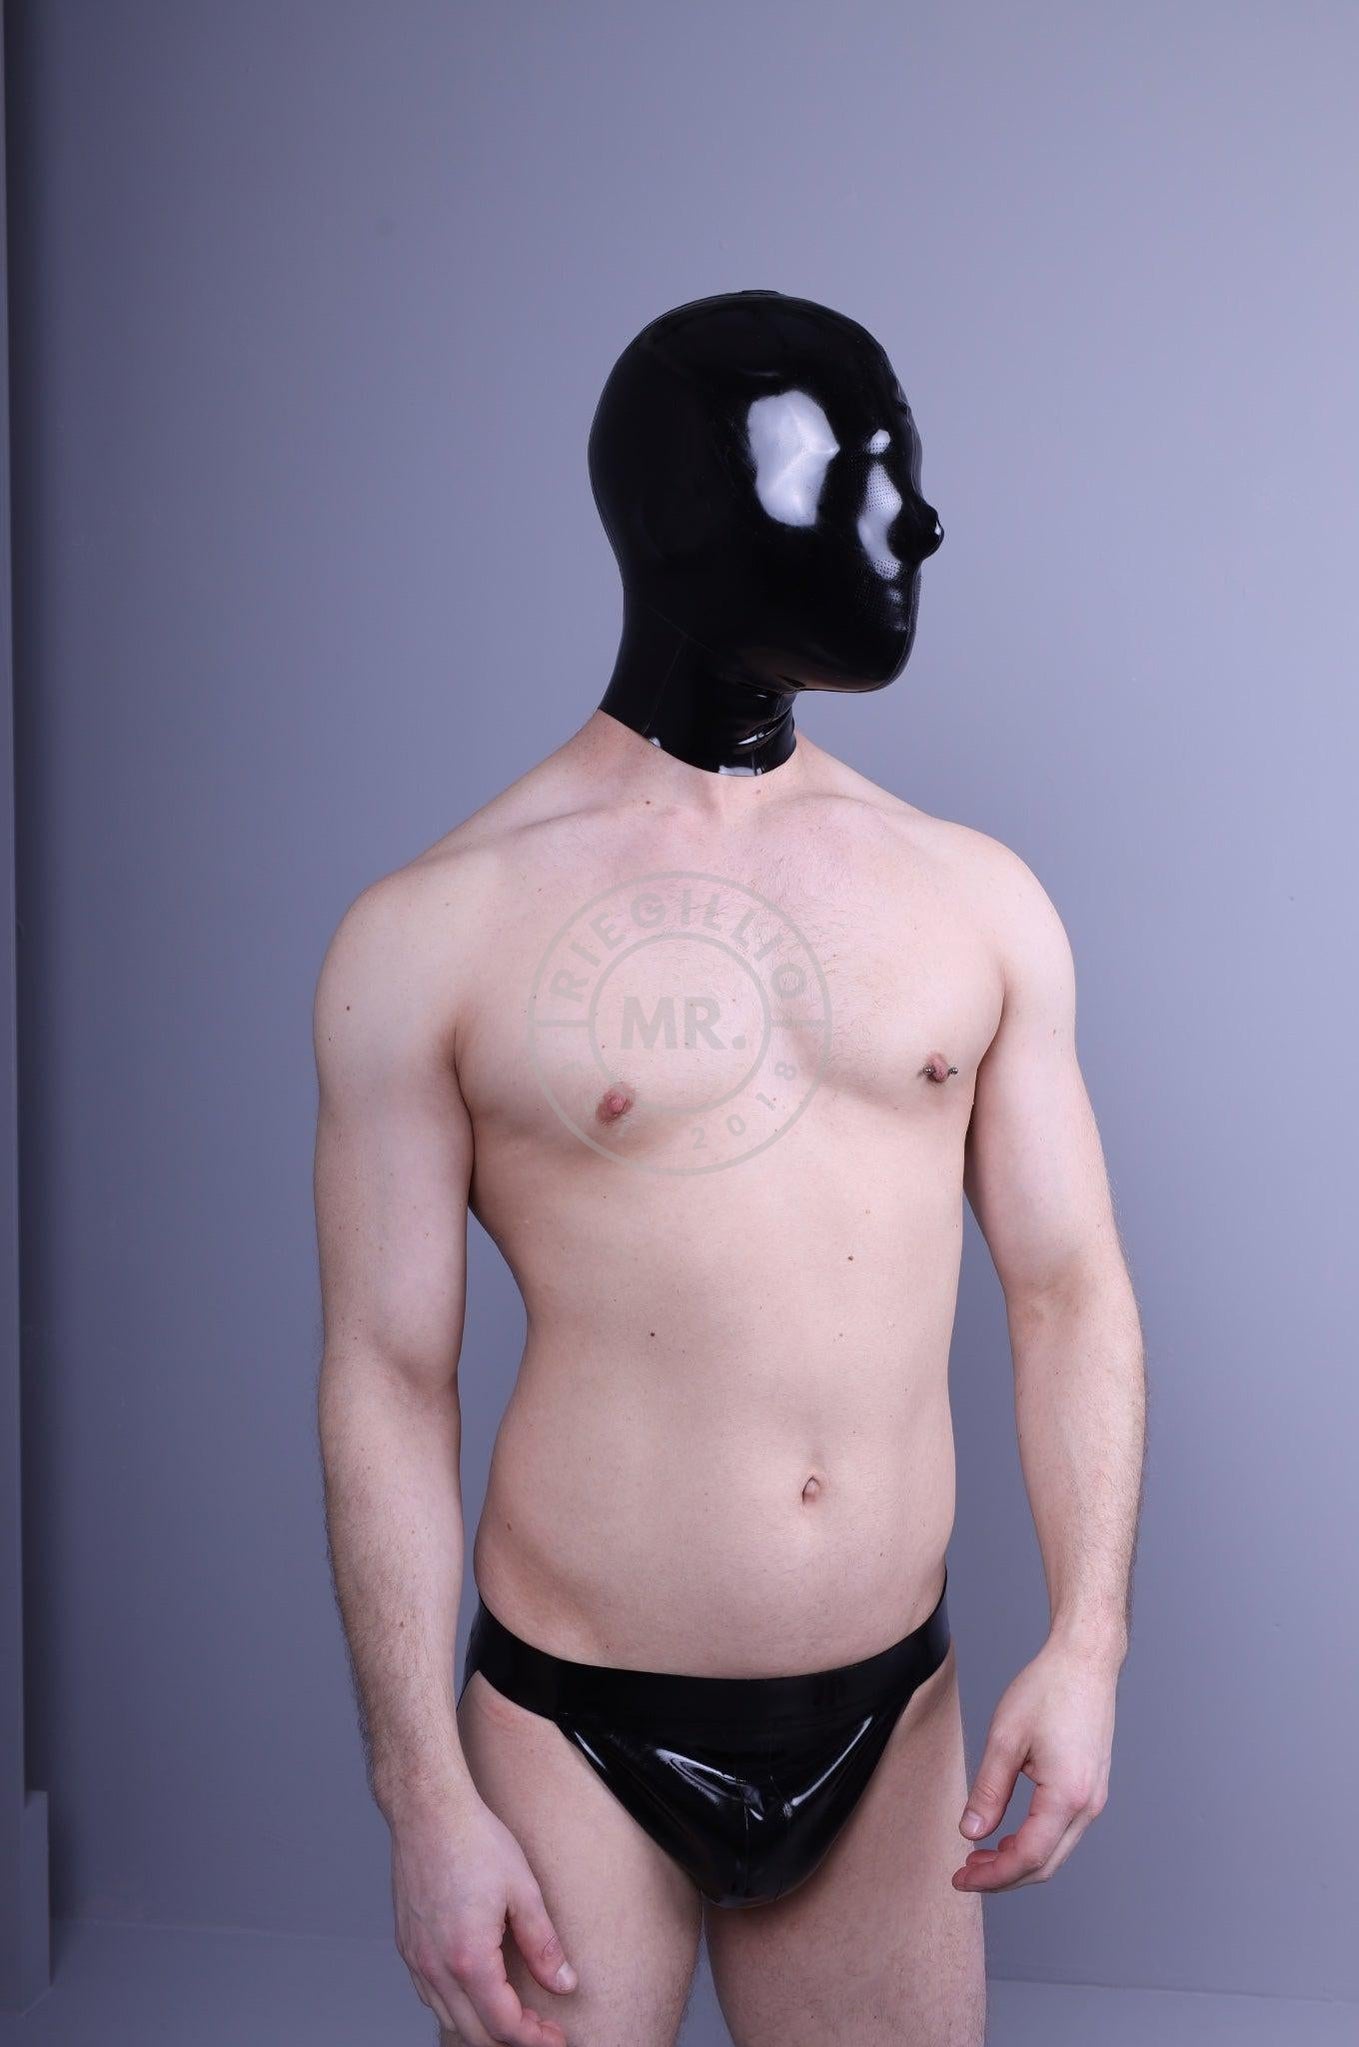 Rubber Micro Perforated Hood With Zip at MR. Riegillio